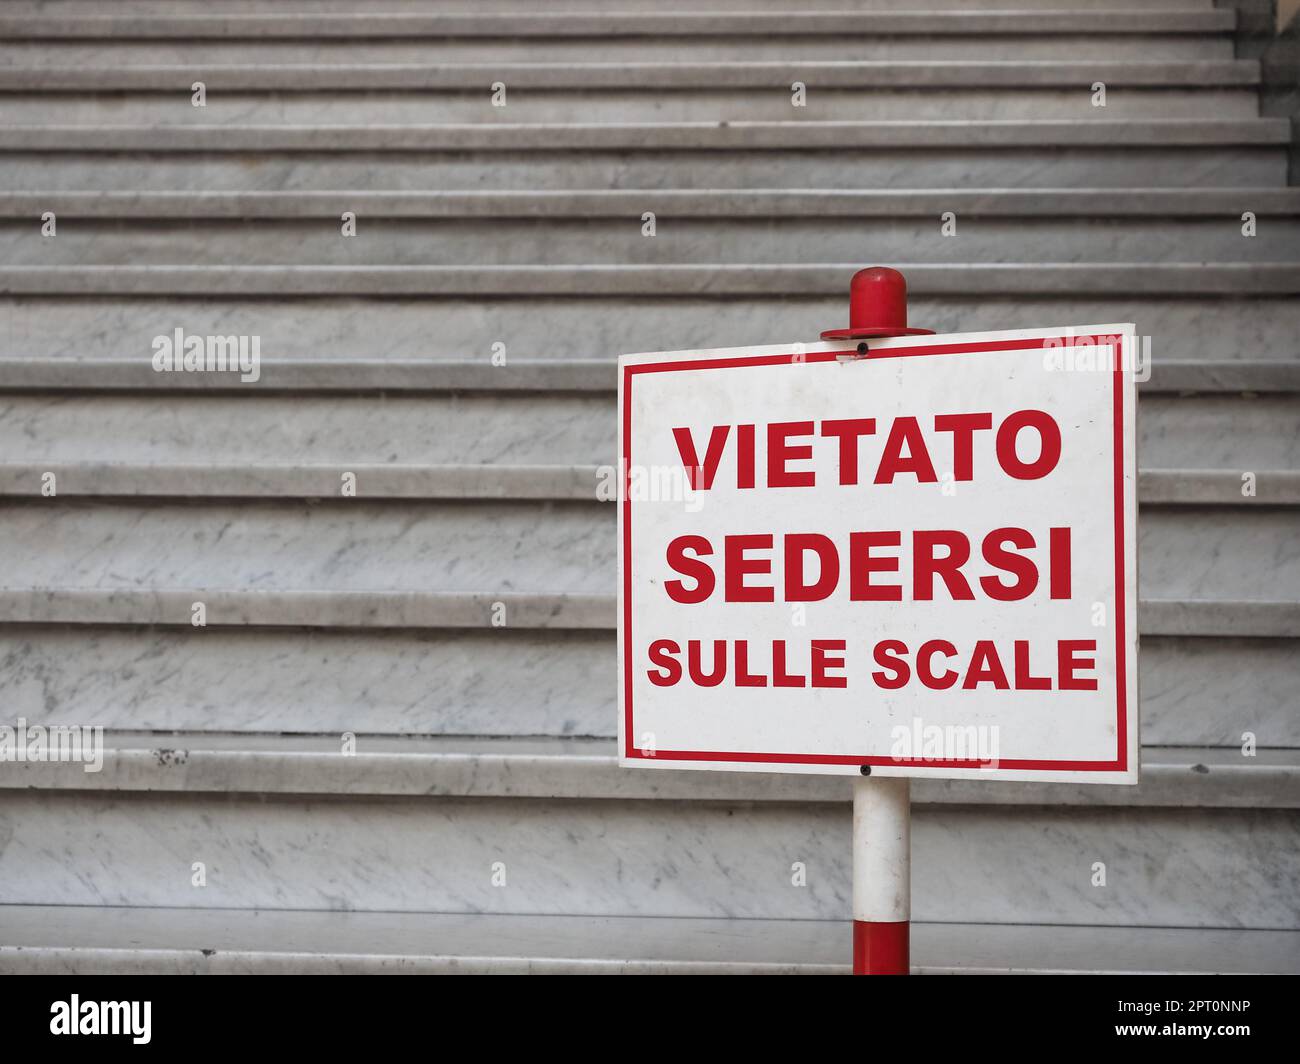 vietato sedersi sulle scale translation do not sit on the stairs sign Stock Photo